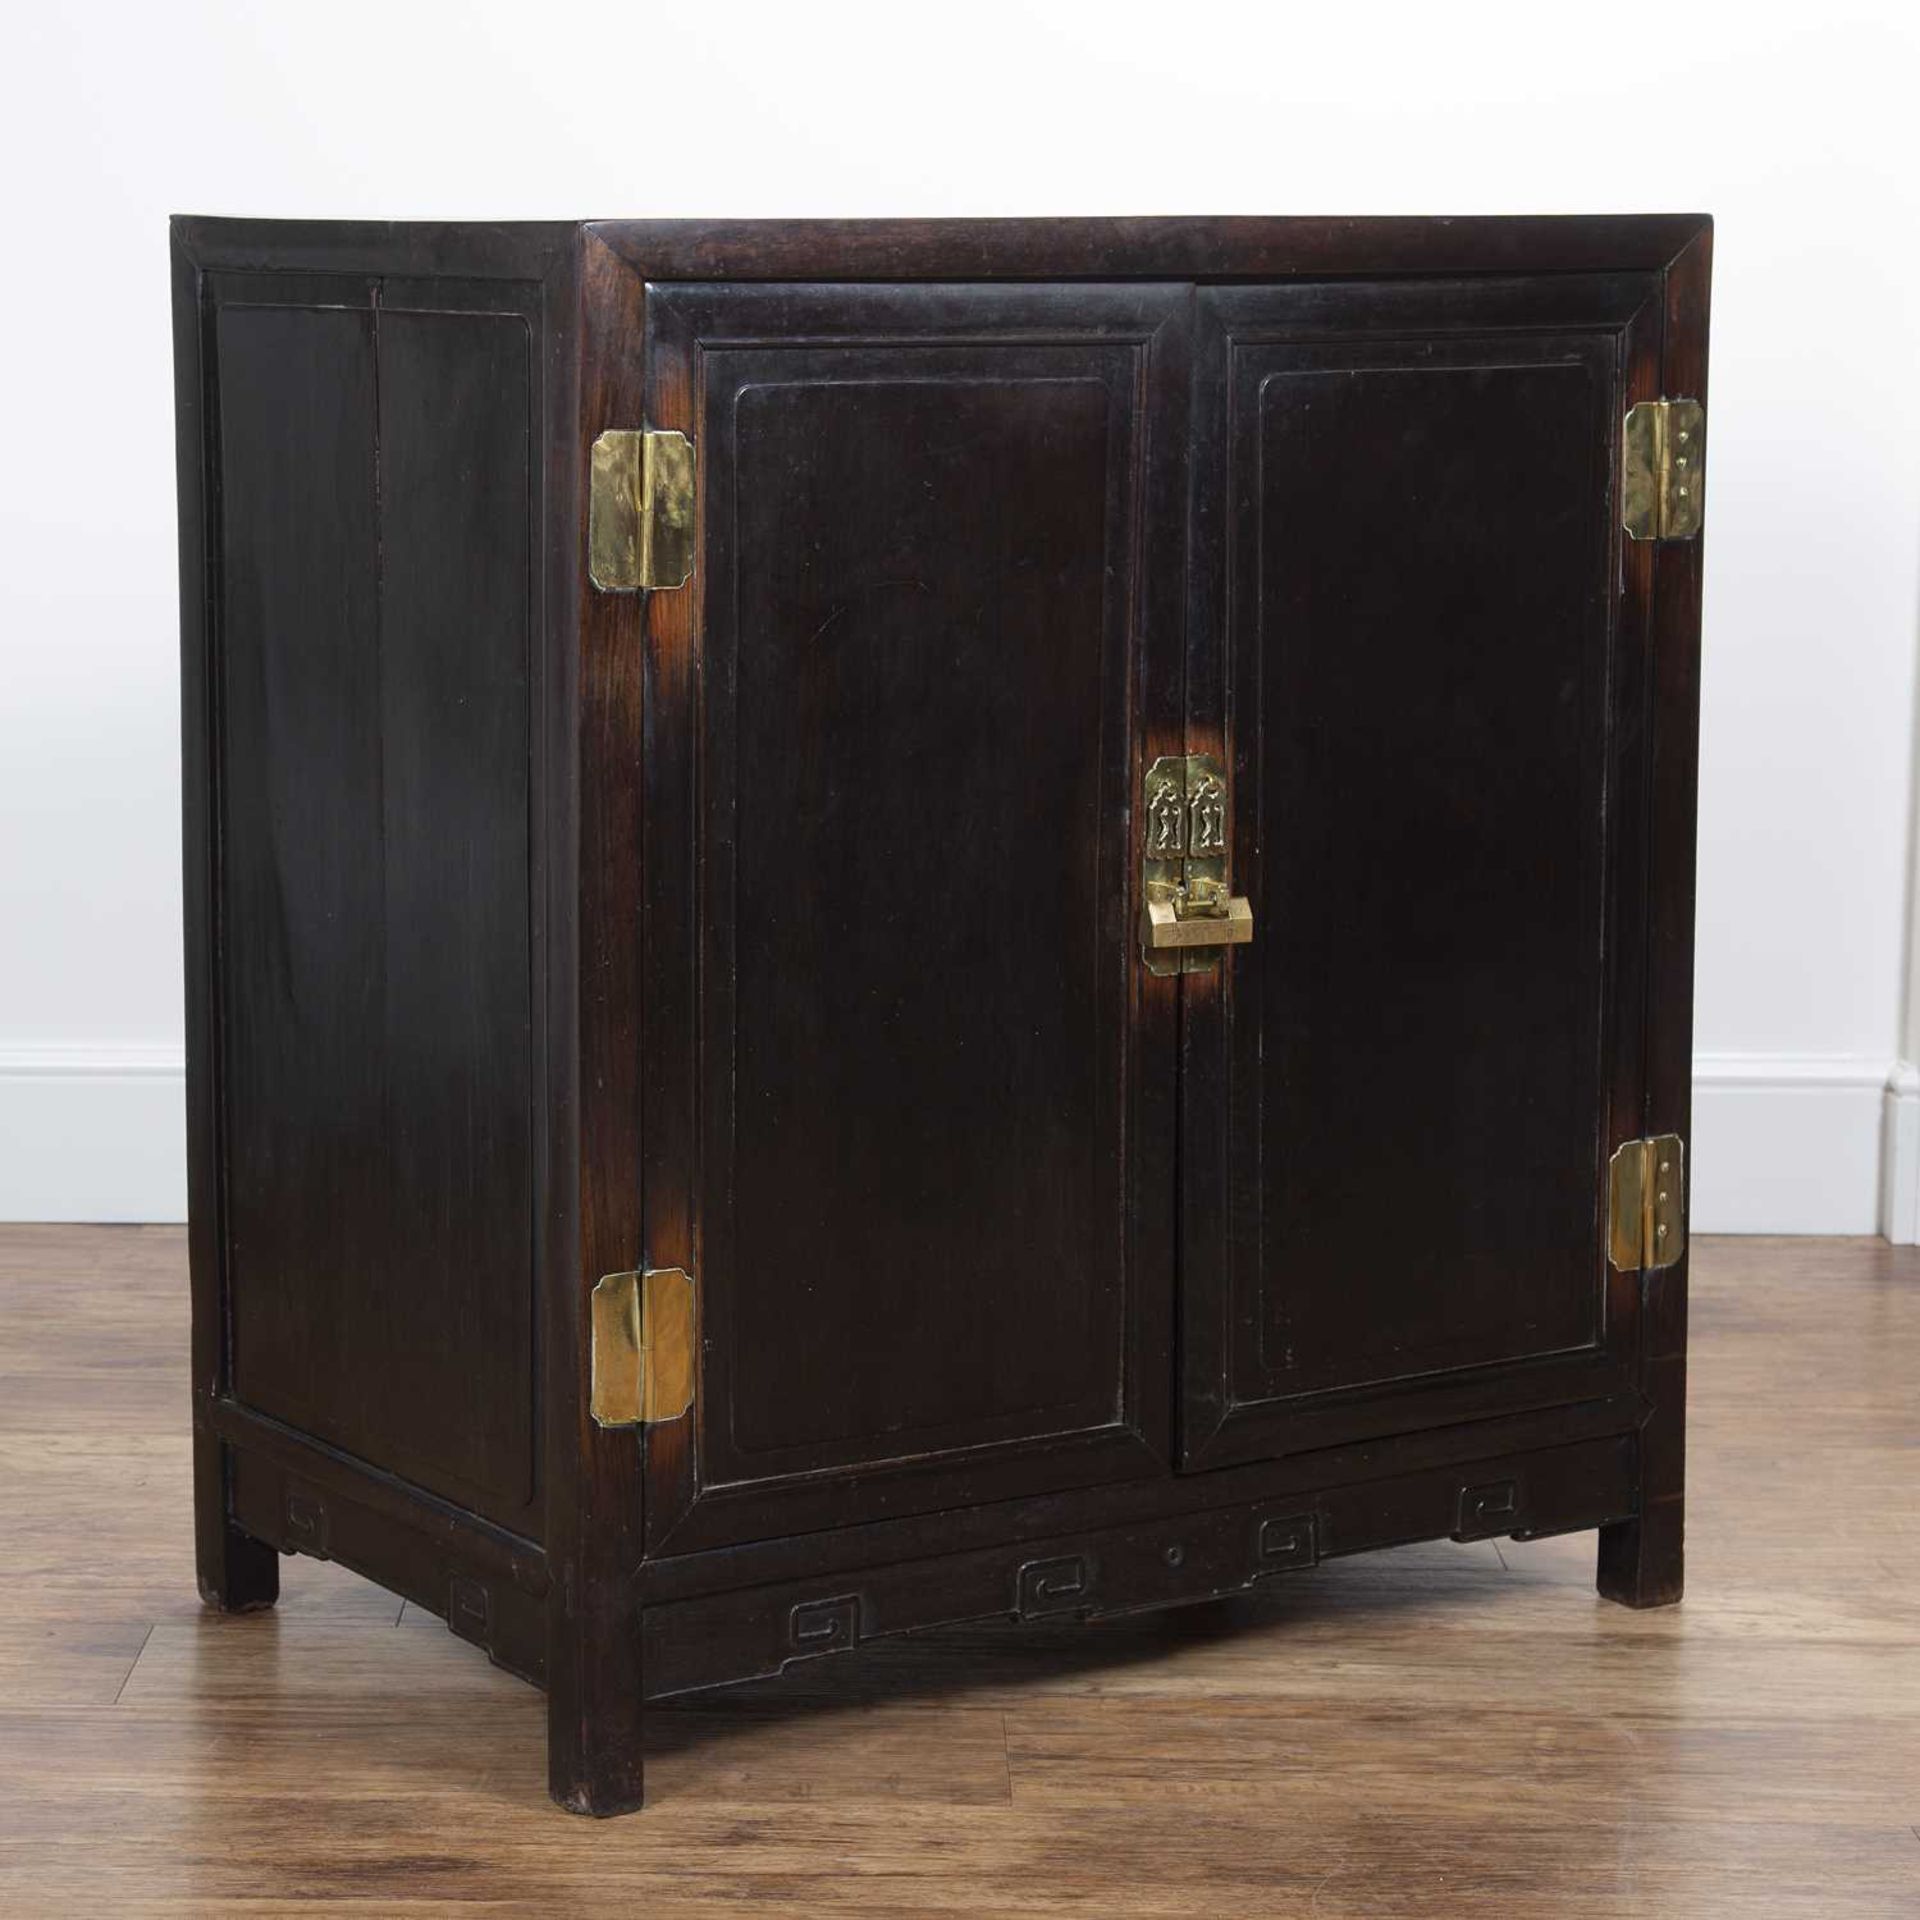 Zitan wood cabinet Chinese, 19th Century, with plain panel doors and with brass locks, 90cm wide x - Image 2 of 7